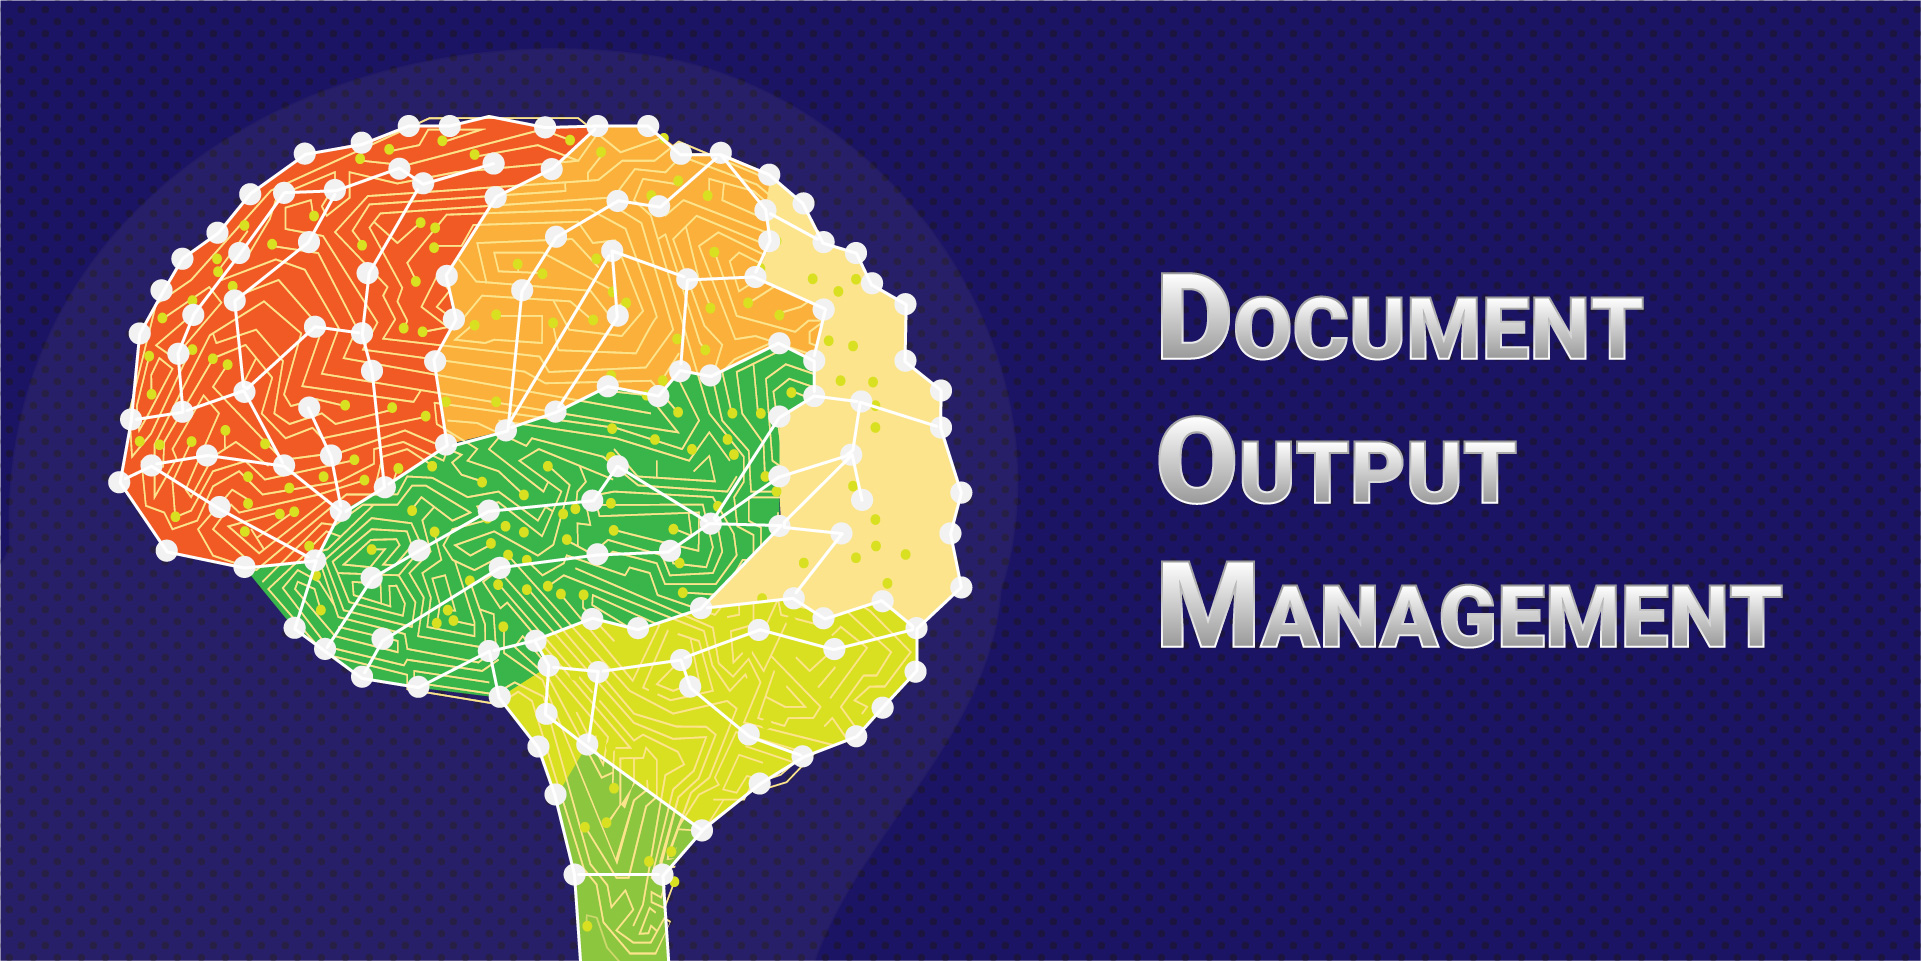 What contributes intelligence to a document software solution is what is known as Output Management solutions and methodologies that provide control and efficiency for all the document processes of an enterprise